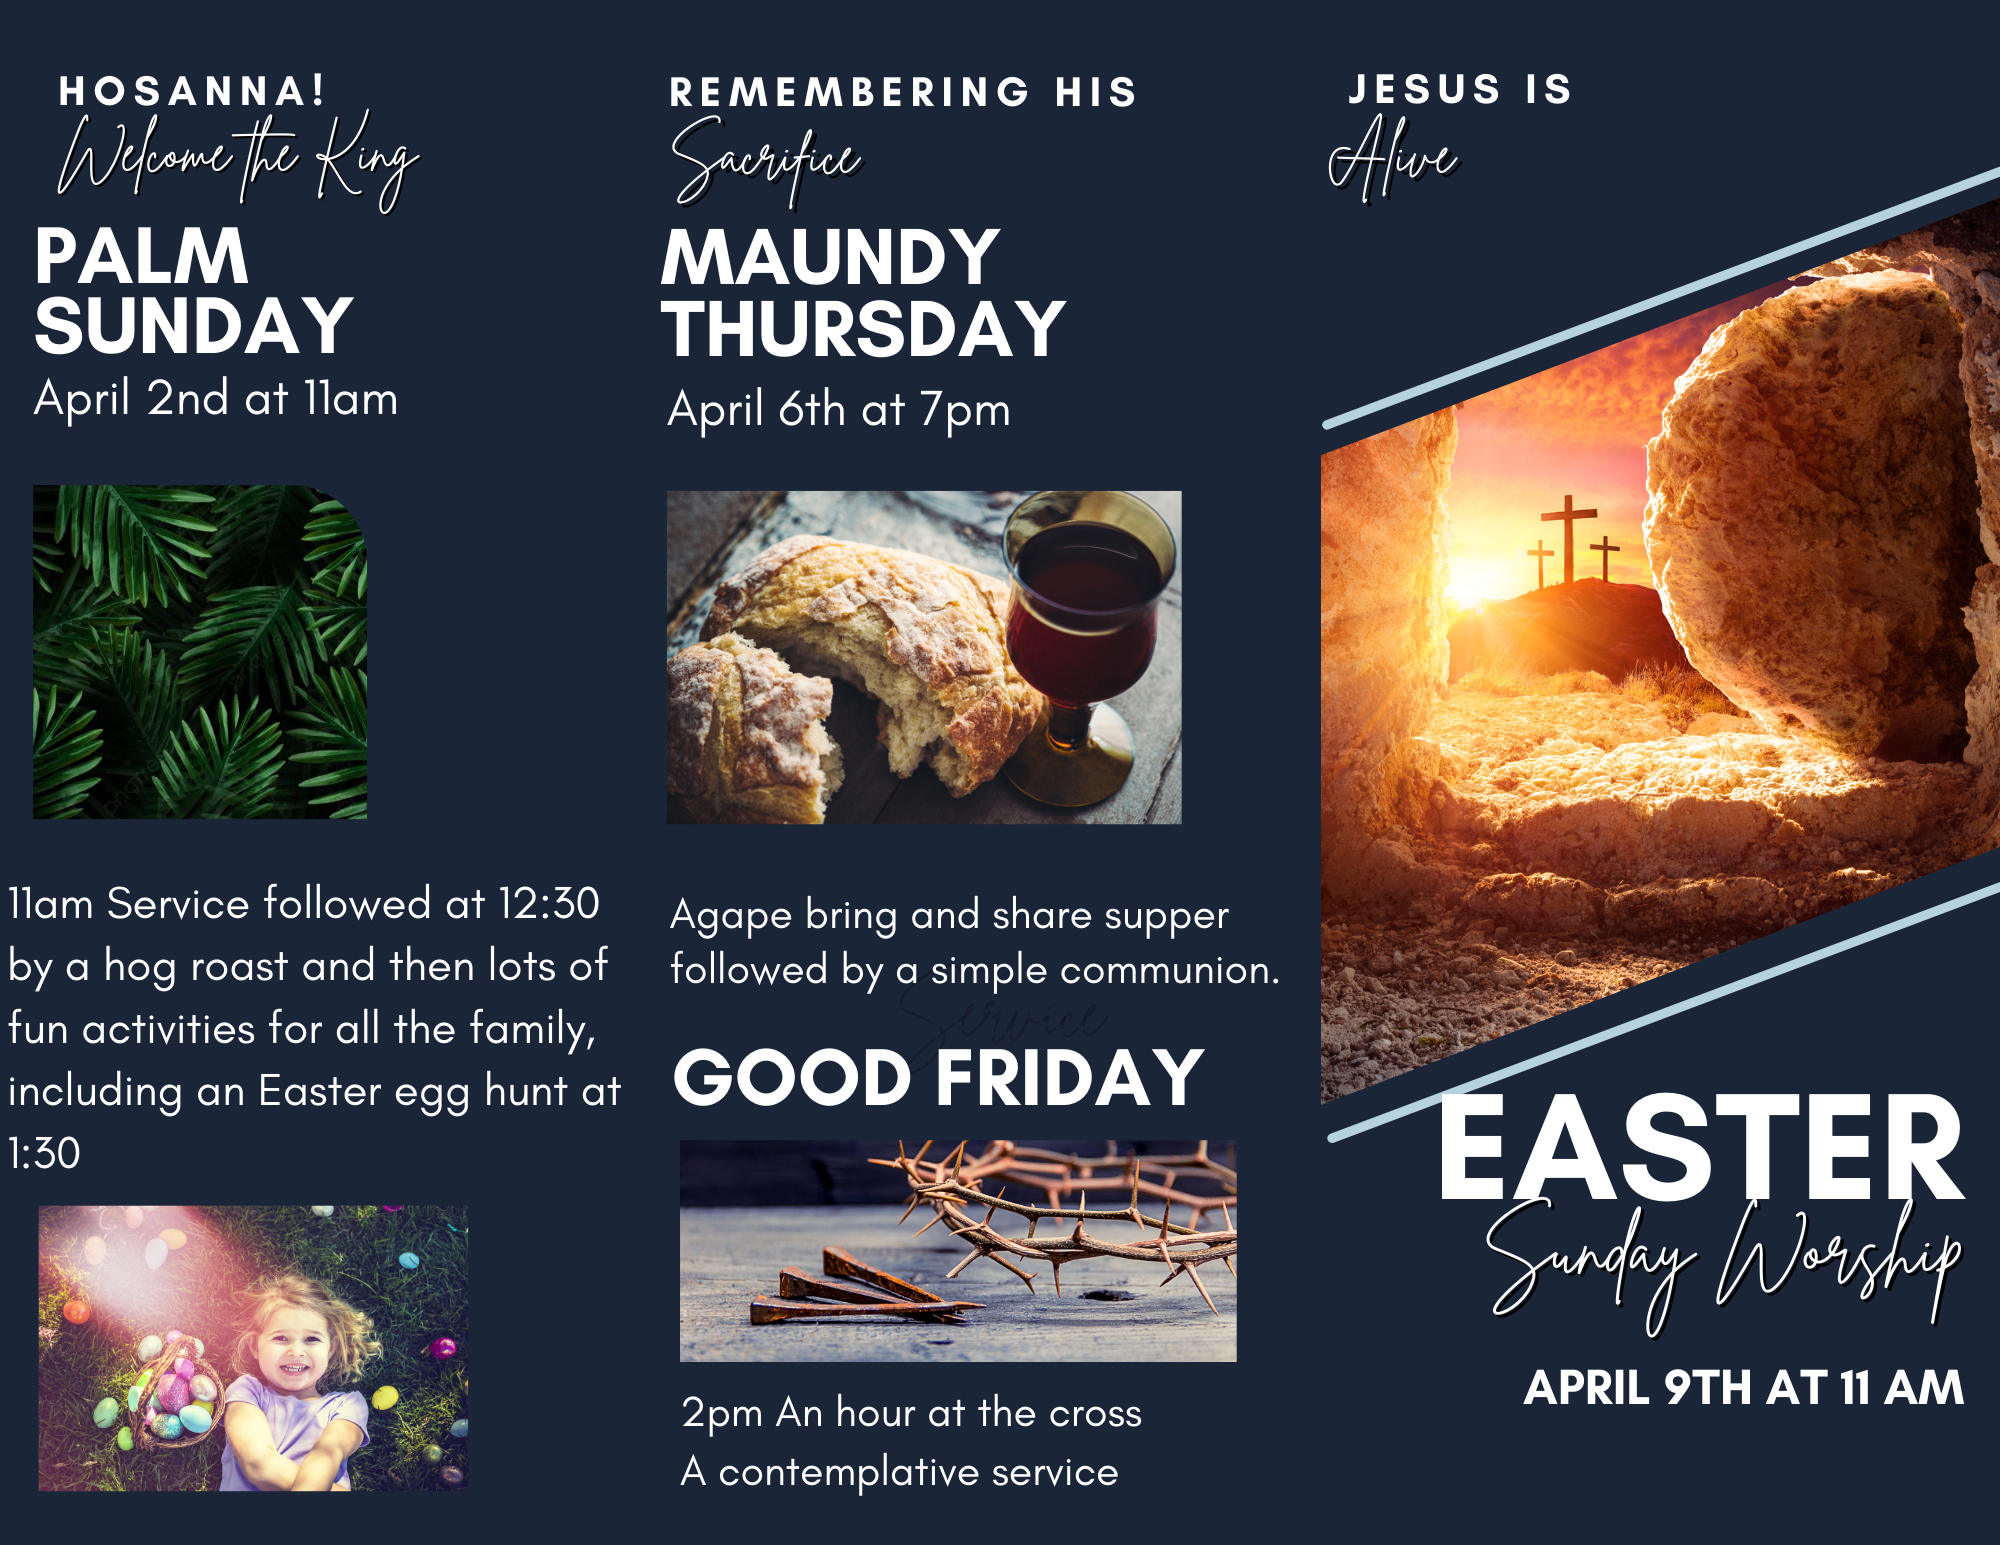 easter services